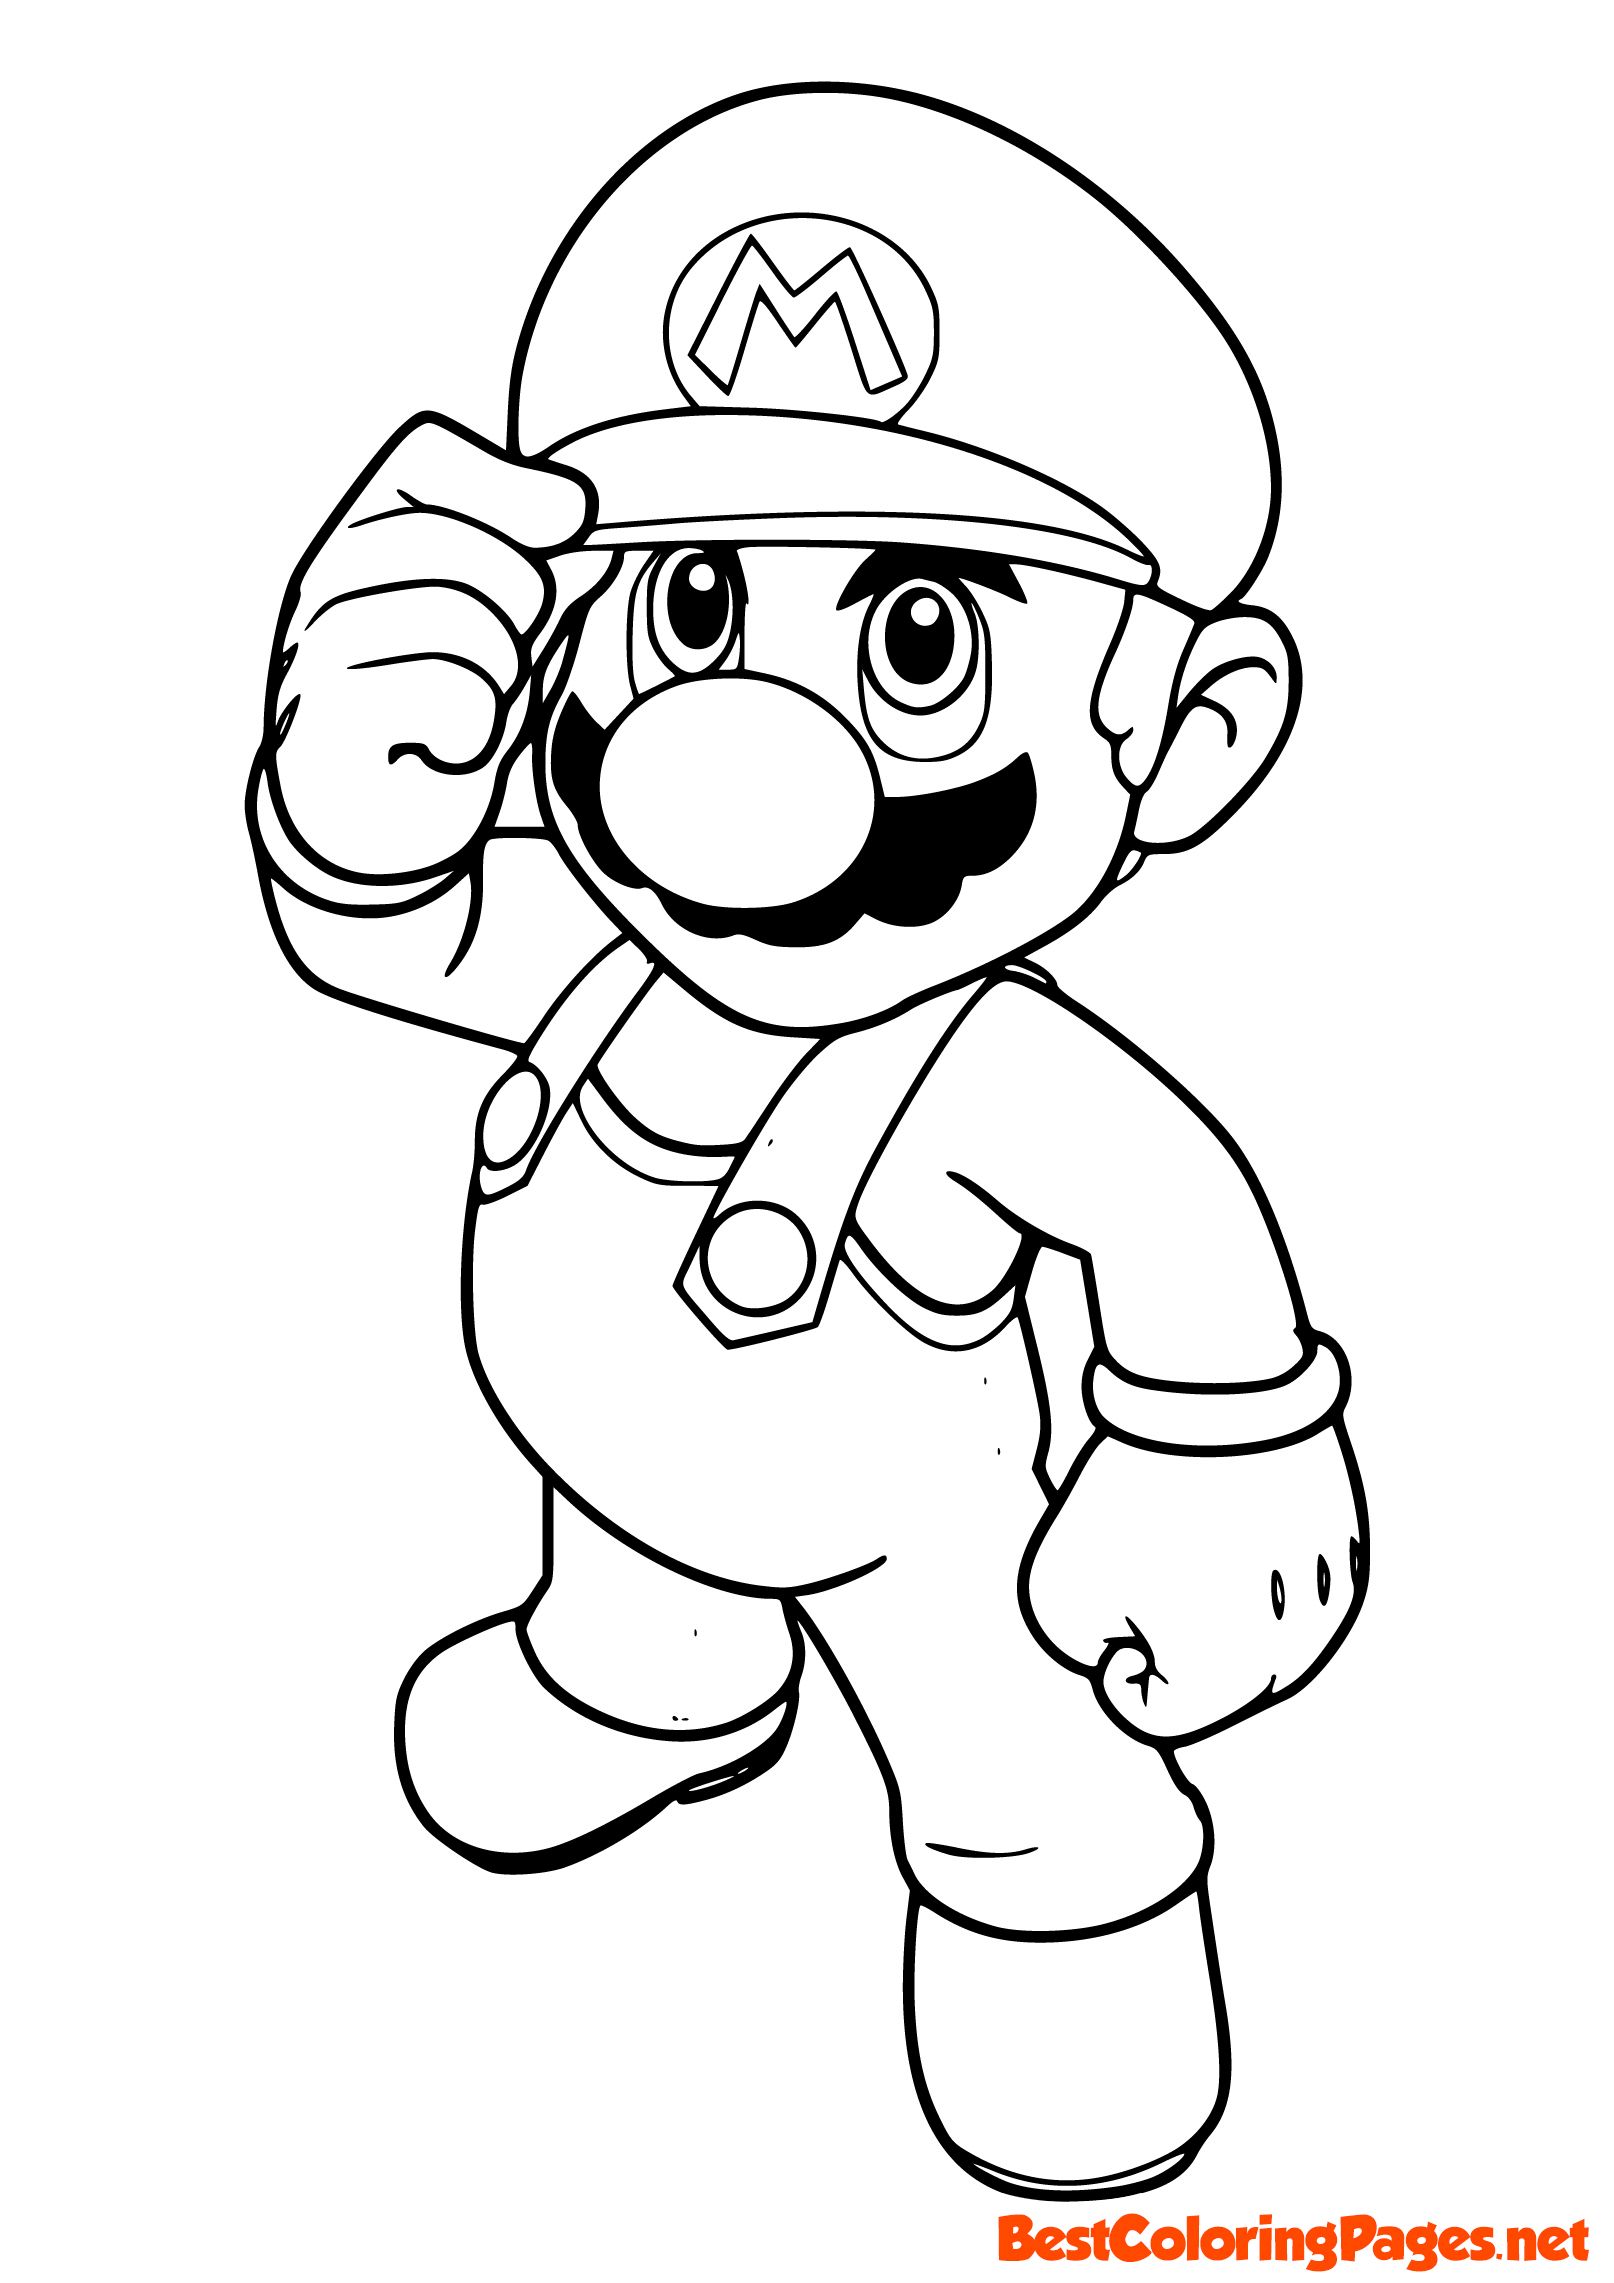 mario colouring pages